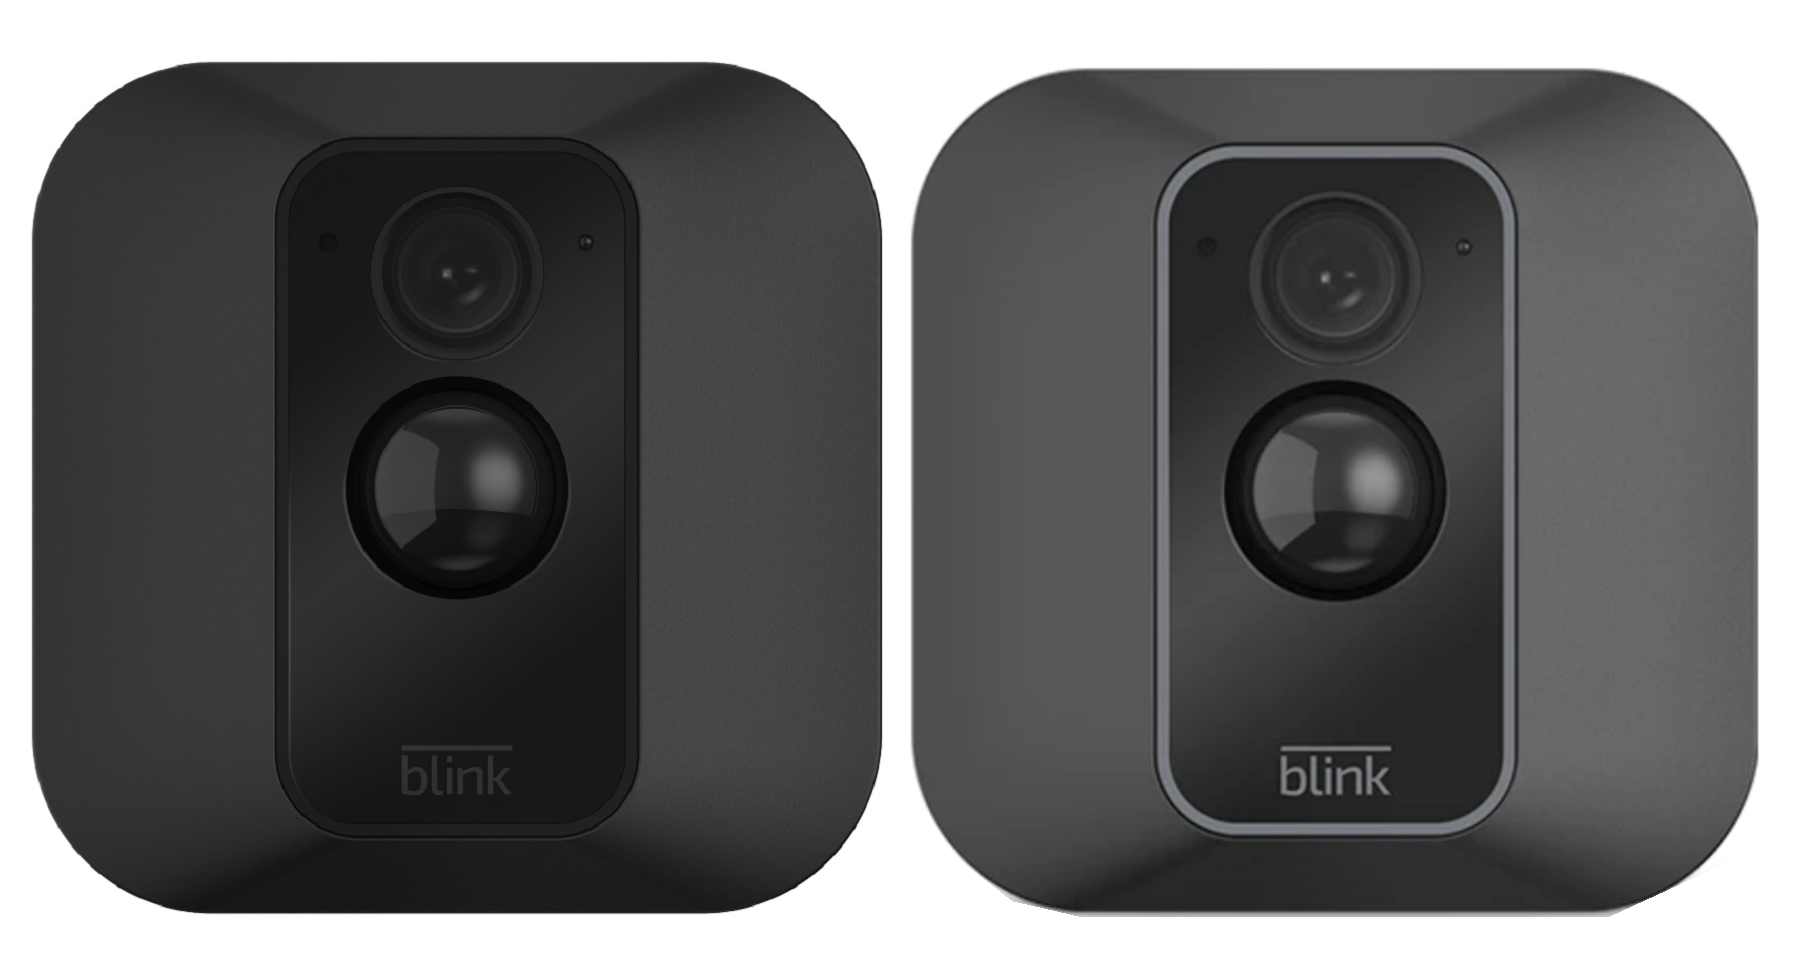 Blink XT Vs. Blink XT2 - What are the Differences?